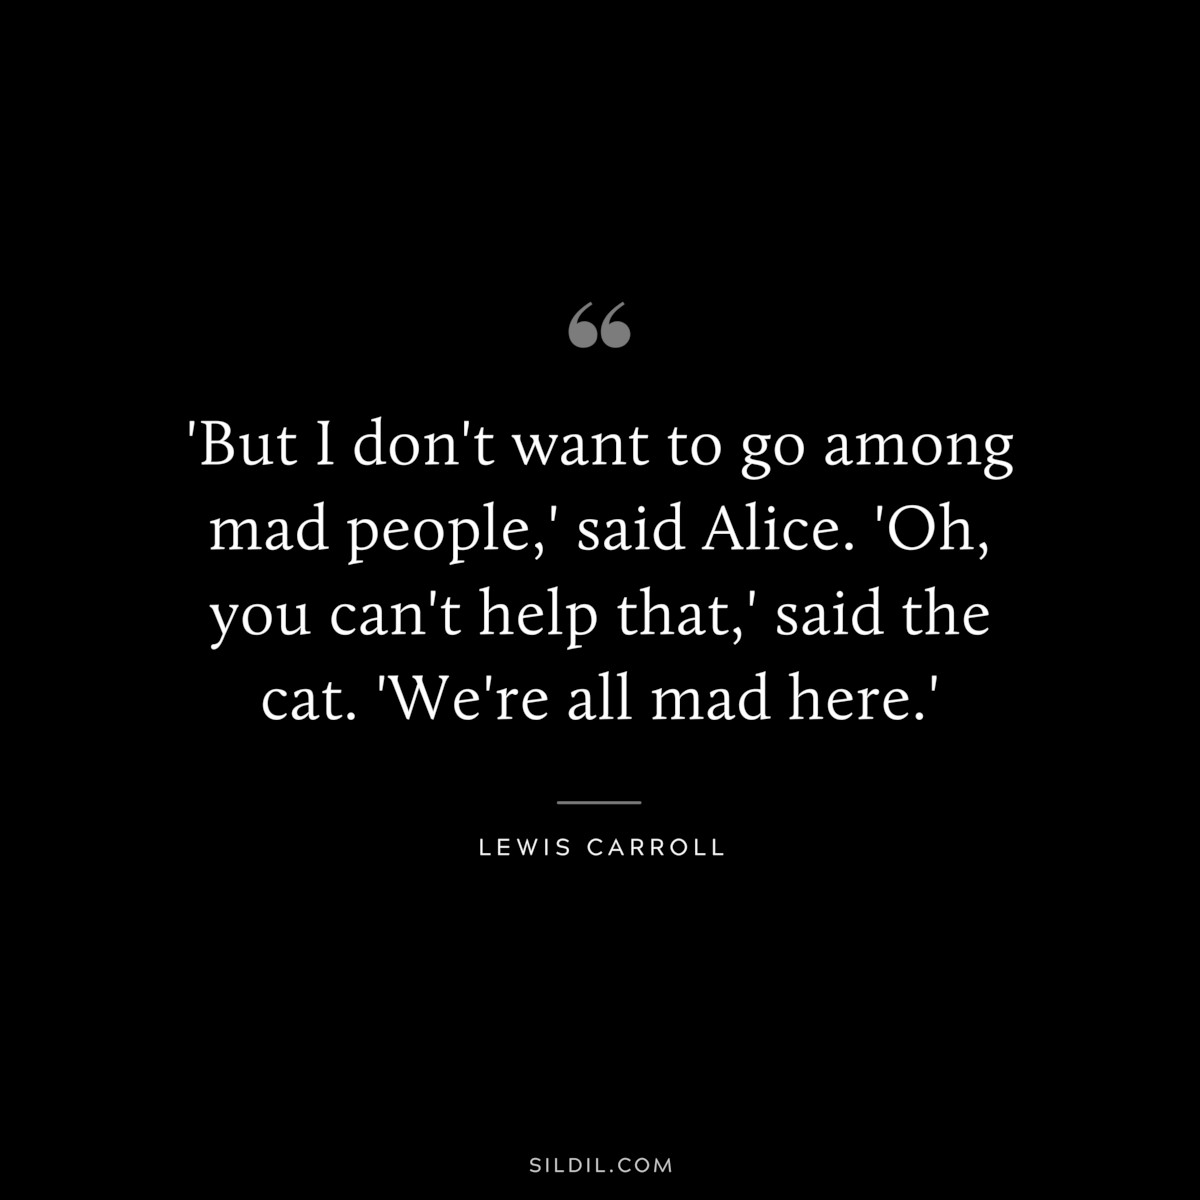 'But I don't want to go among mad people,' said Alice. 'Oh, you can't help that,' said the cat. 'We're all mad here.'